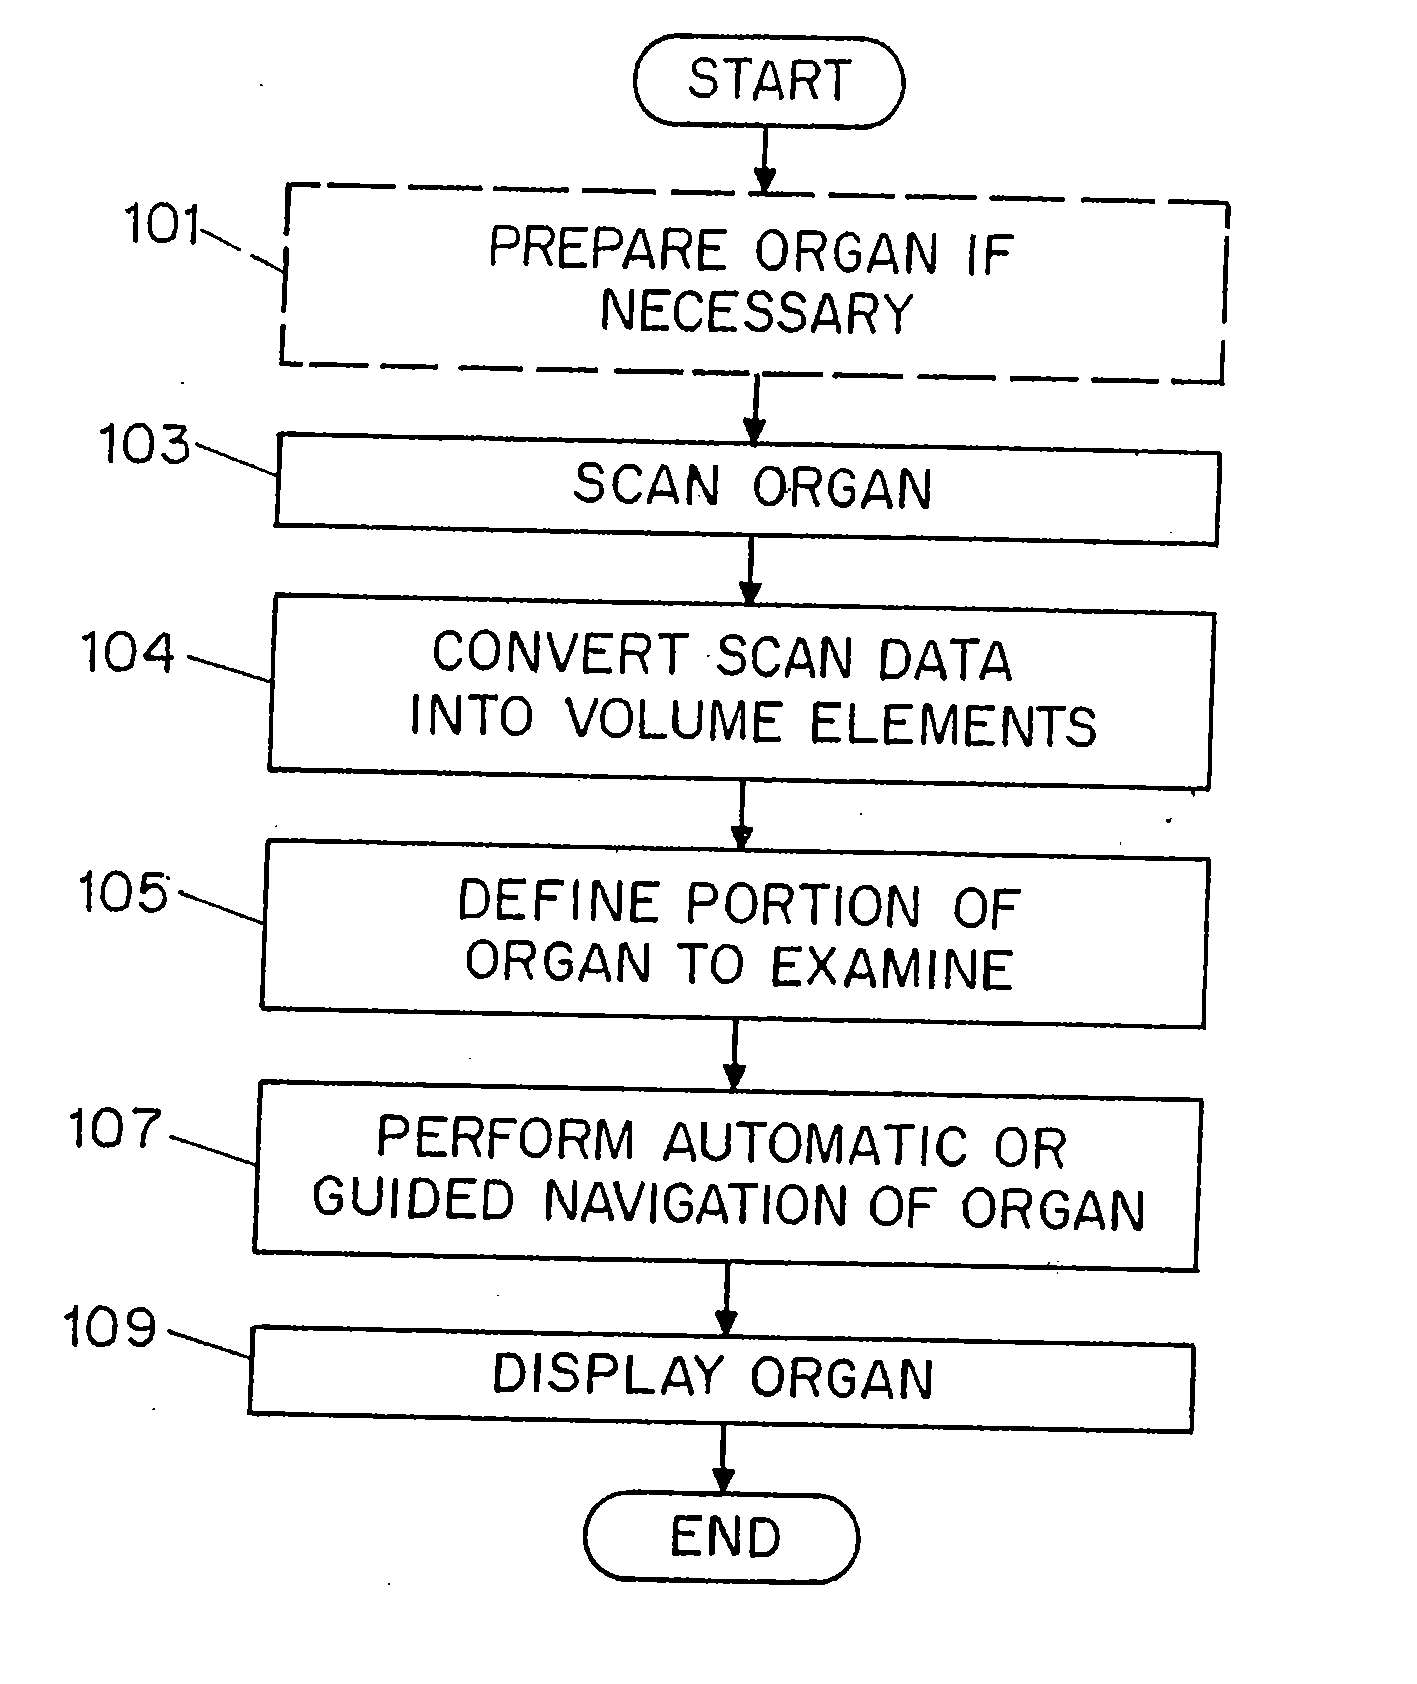 System and method for performing a three-dimentional virtual examination of objects, such as internal organs